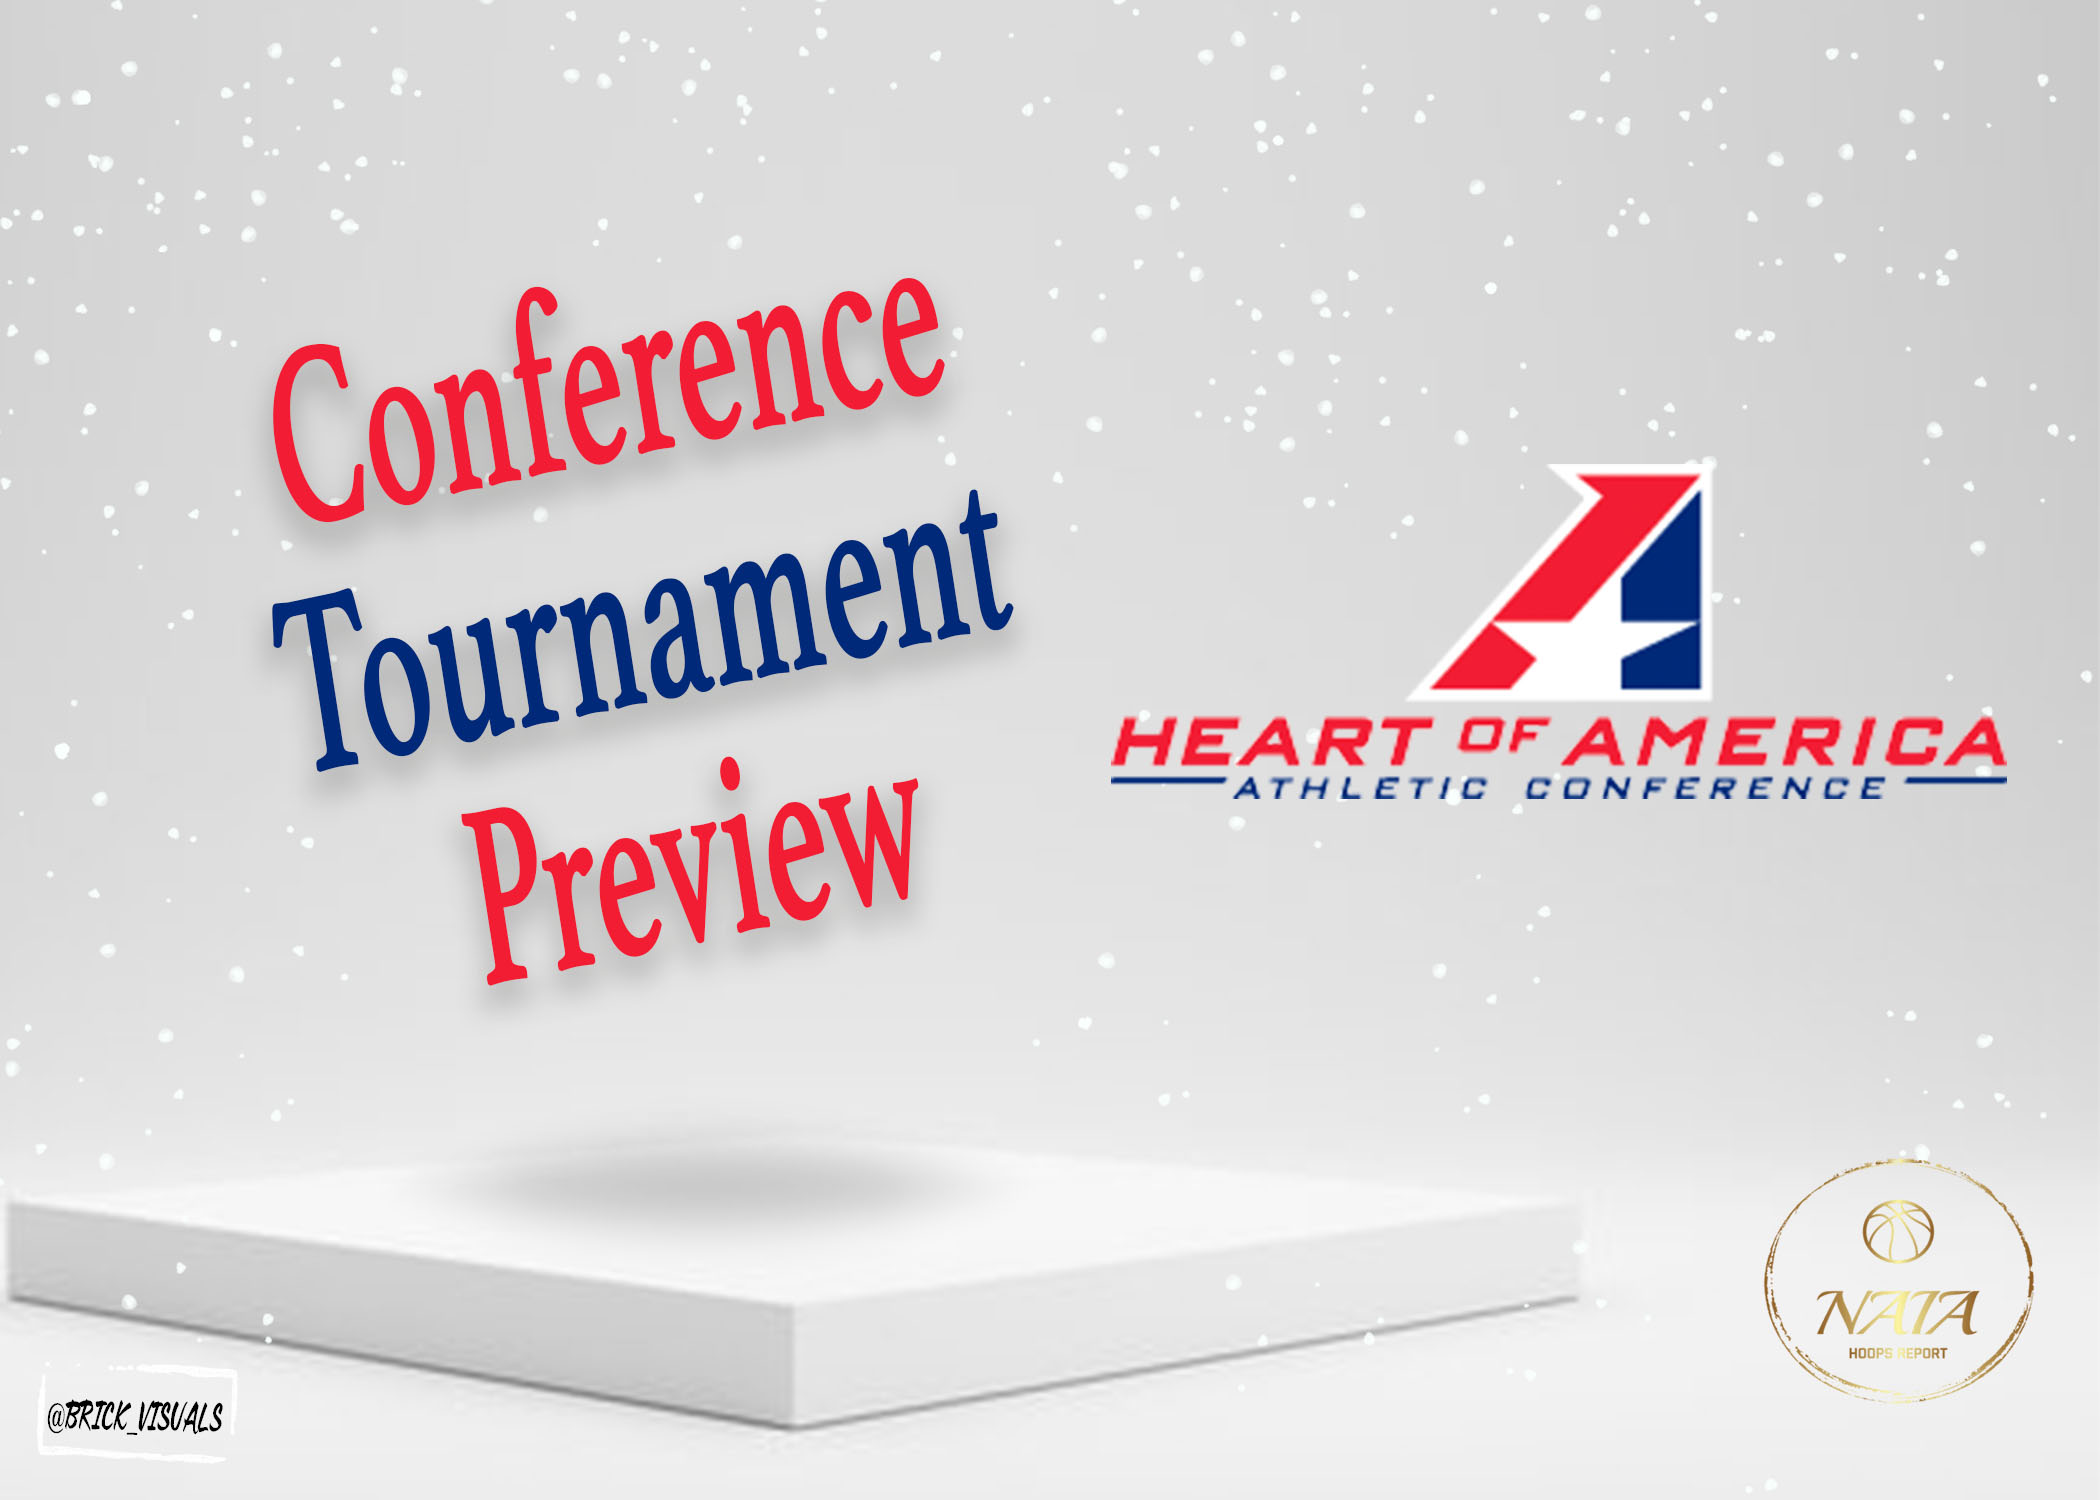 The Heart of America Tournament – Championship Preview